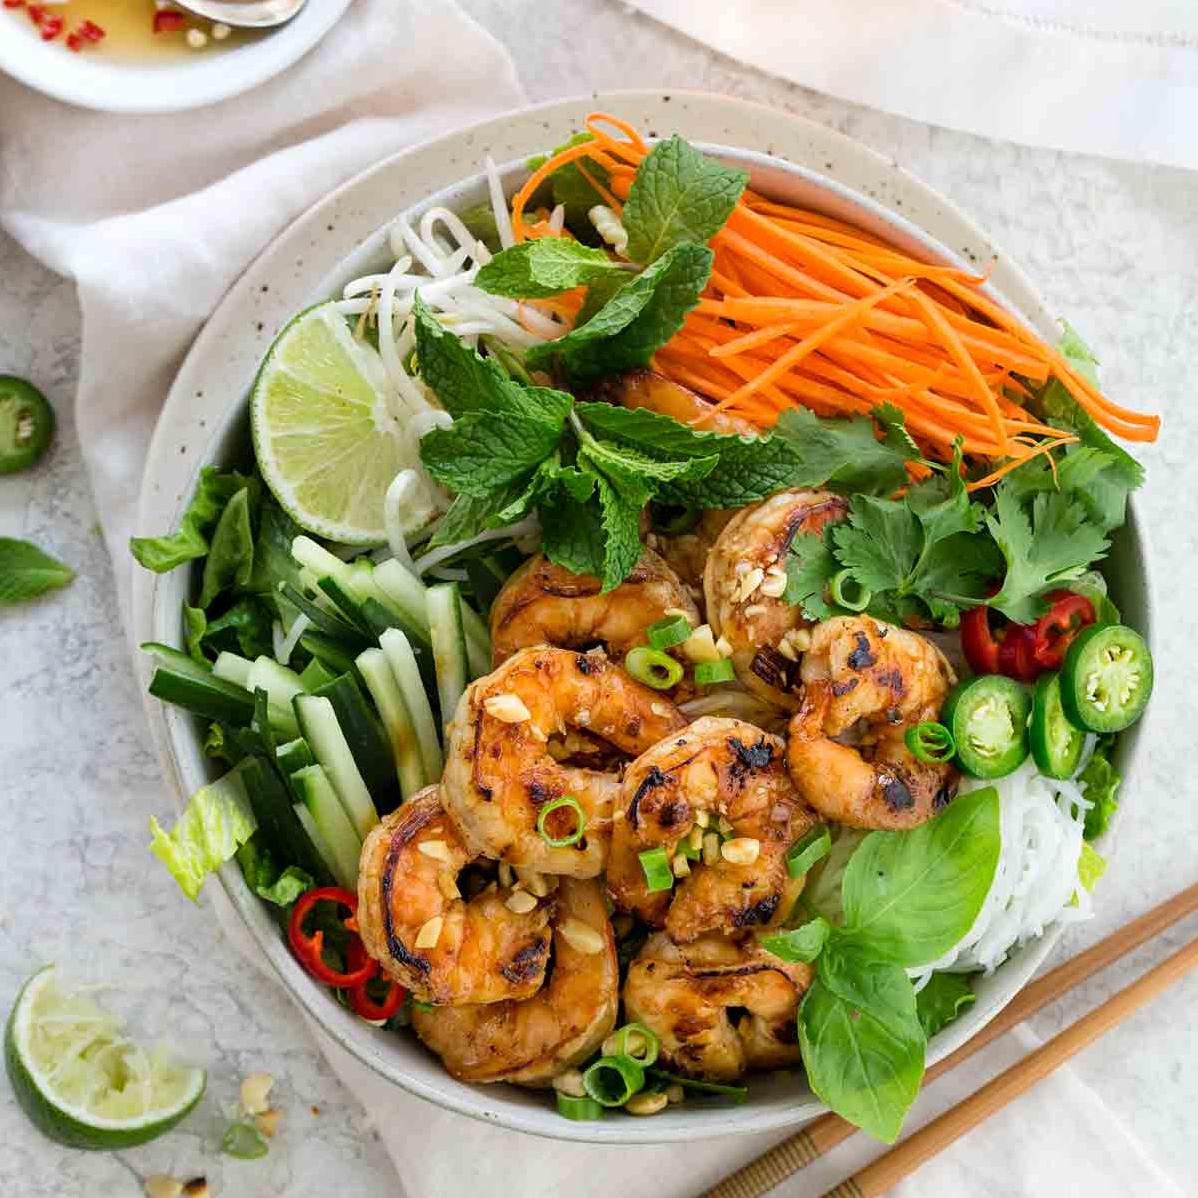  An explosion of colors and flavors in one delicious bowl! 🌈🍤🥗